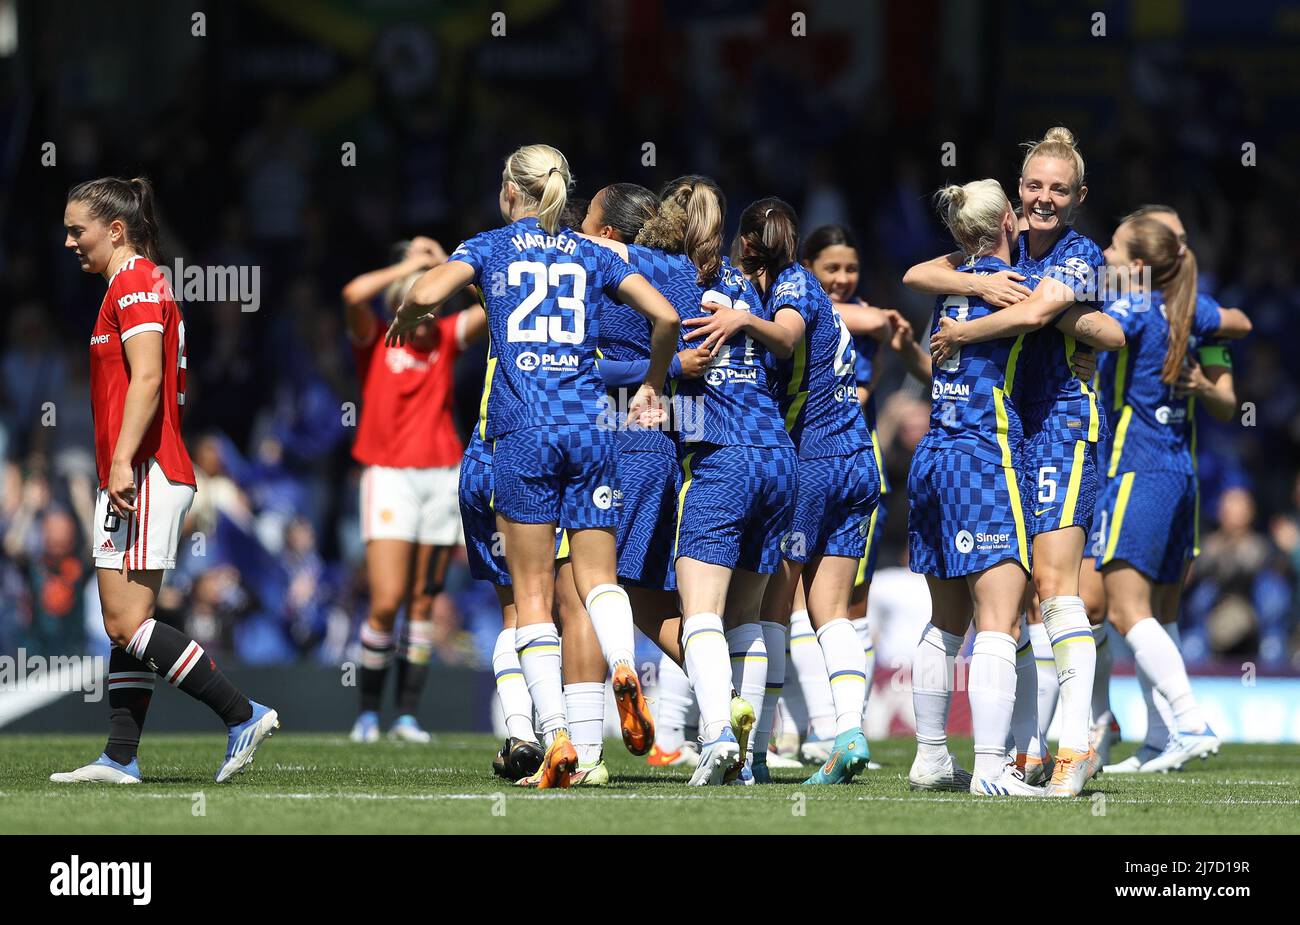 Kington Upon Thames, England, 8th May 2022.  Chelsea players celebrate after their team win the The FA Women's Super League match at Kingsmeadow, Kington Upon Thames. Picture credit should read: Paul Terry / Sportimage Stock Photo